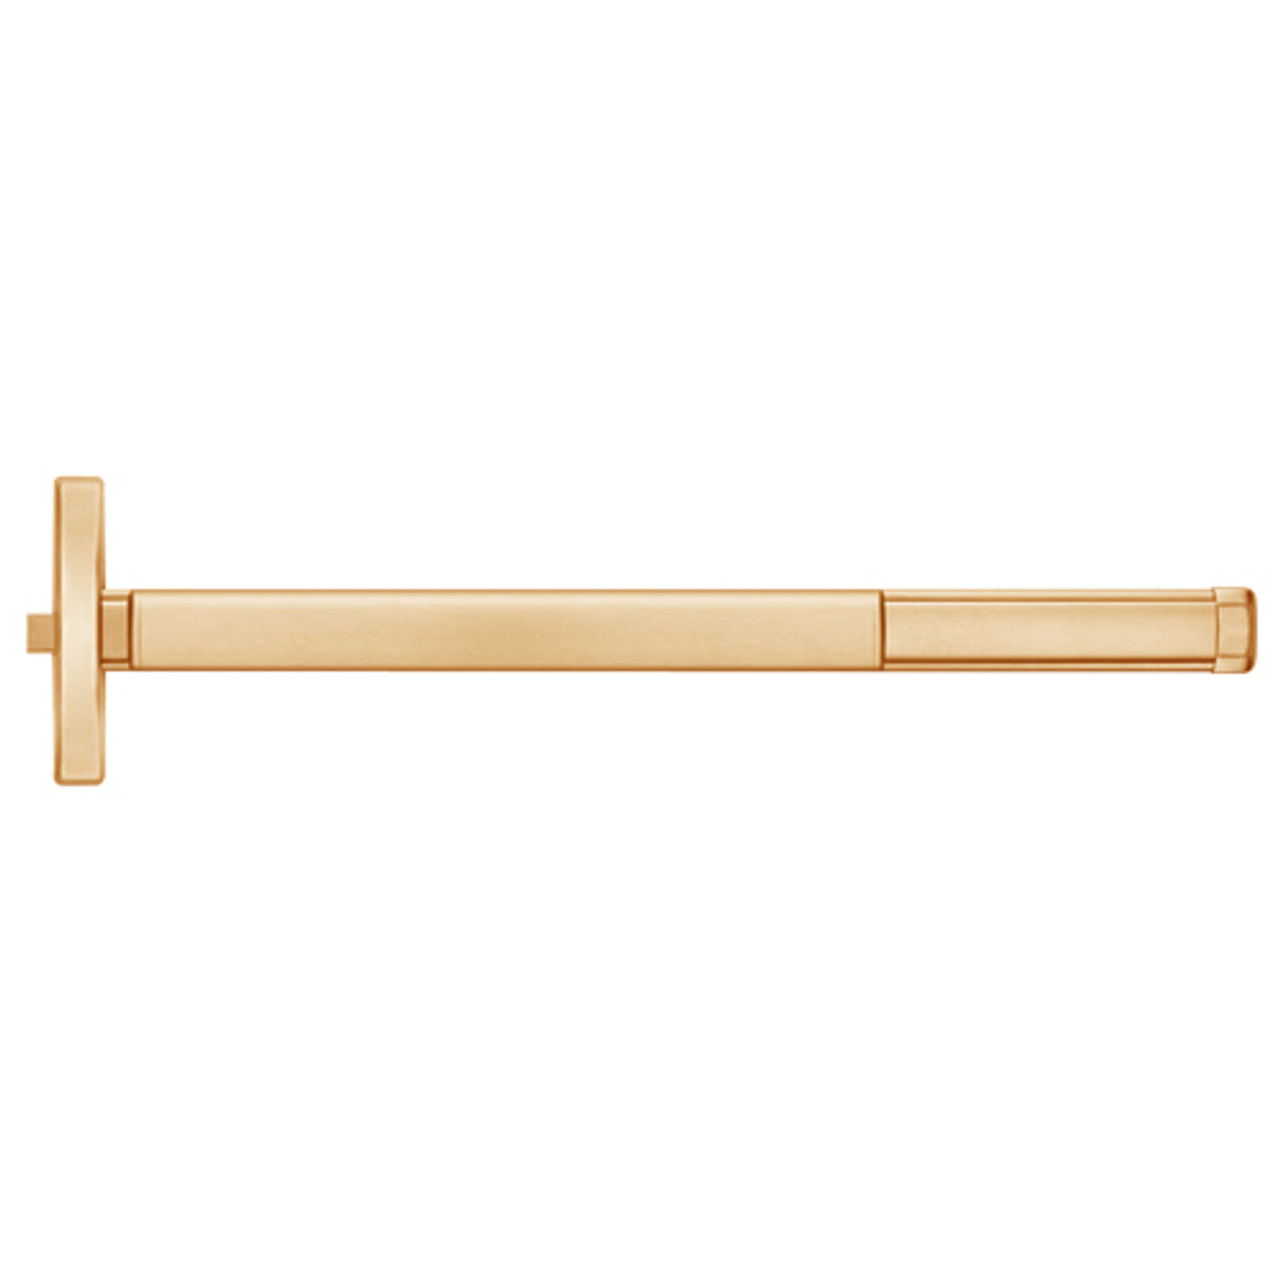 TS2403-612-36 PHI 2400 Series Non Fire Rated Apex Rim Exit Device with Touchbar Monitoring Switch Prepped for Key Retracts Latchbolt in Satin Bronze Finish